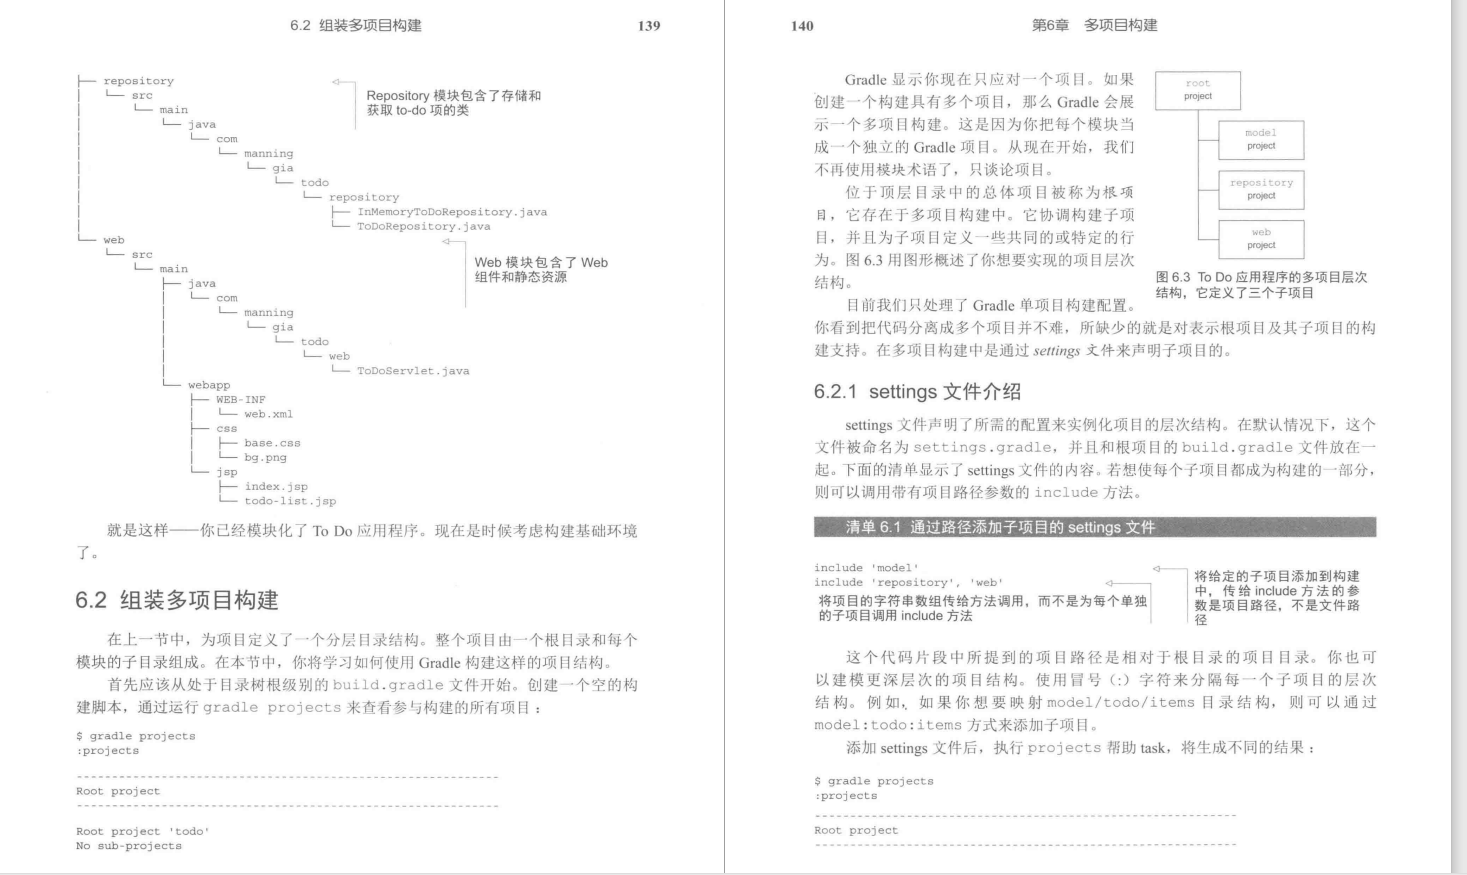 Fortunately to get the Gradle actual combat notes inside Alibaba, take advantage of the double festival to make up